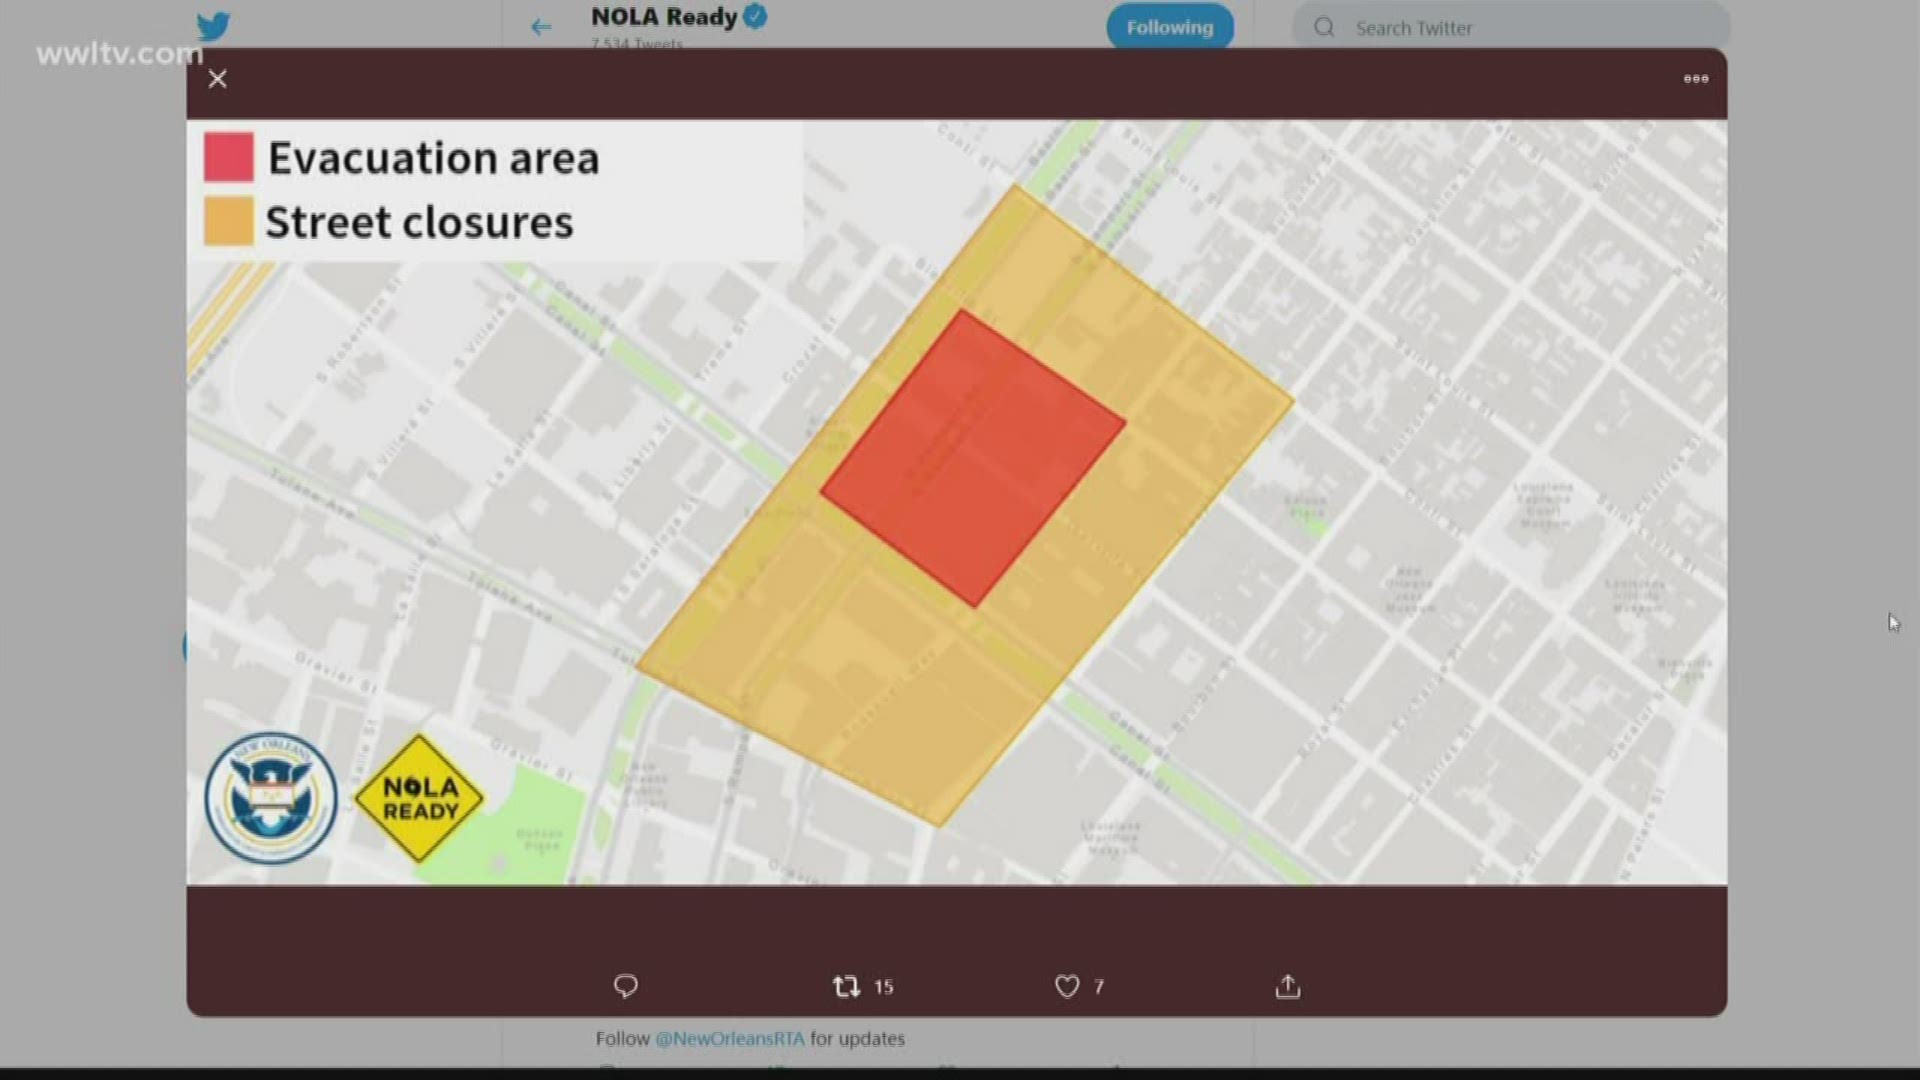 The New Orleans Fire Department is evacuating buildings in a four-block area around the collapsed hotel. The lighter orange area indicates closed streets.